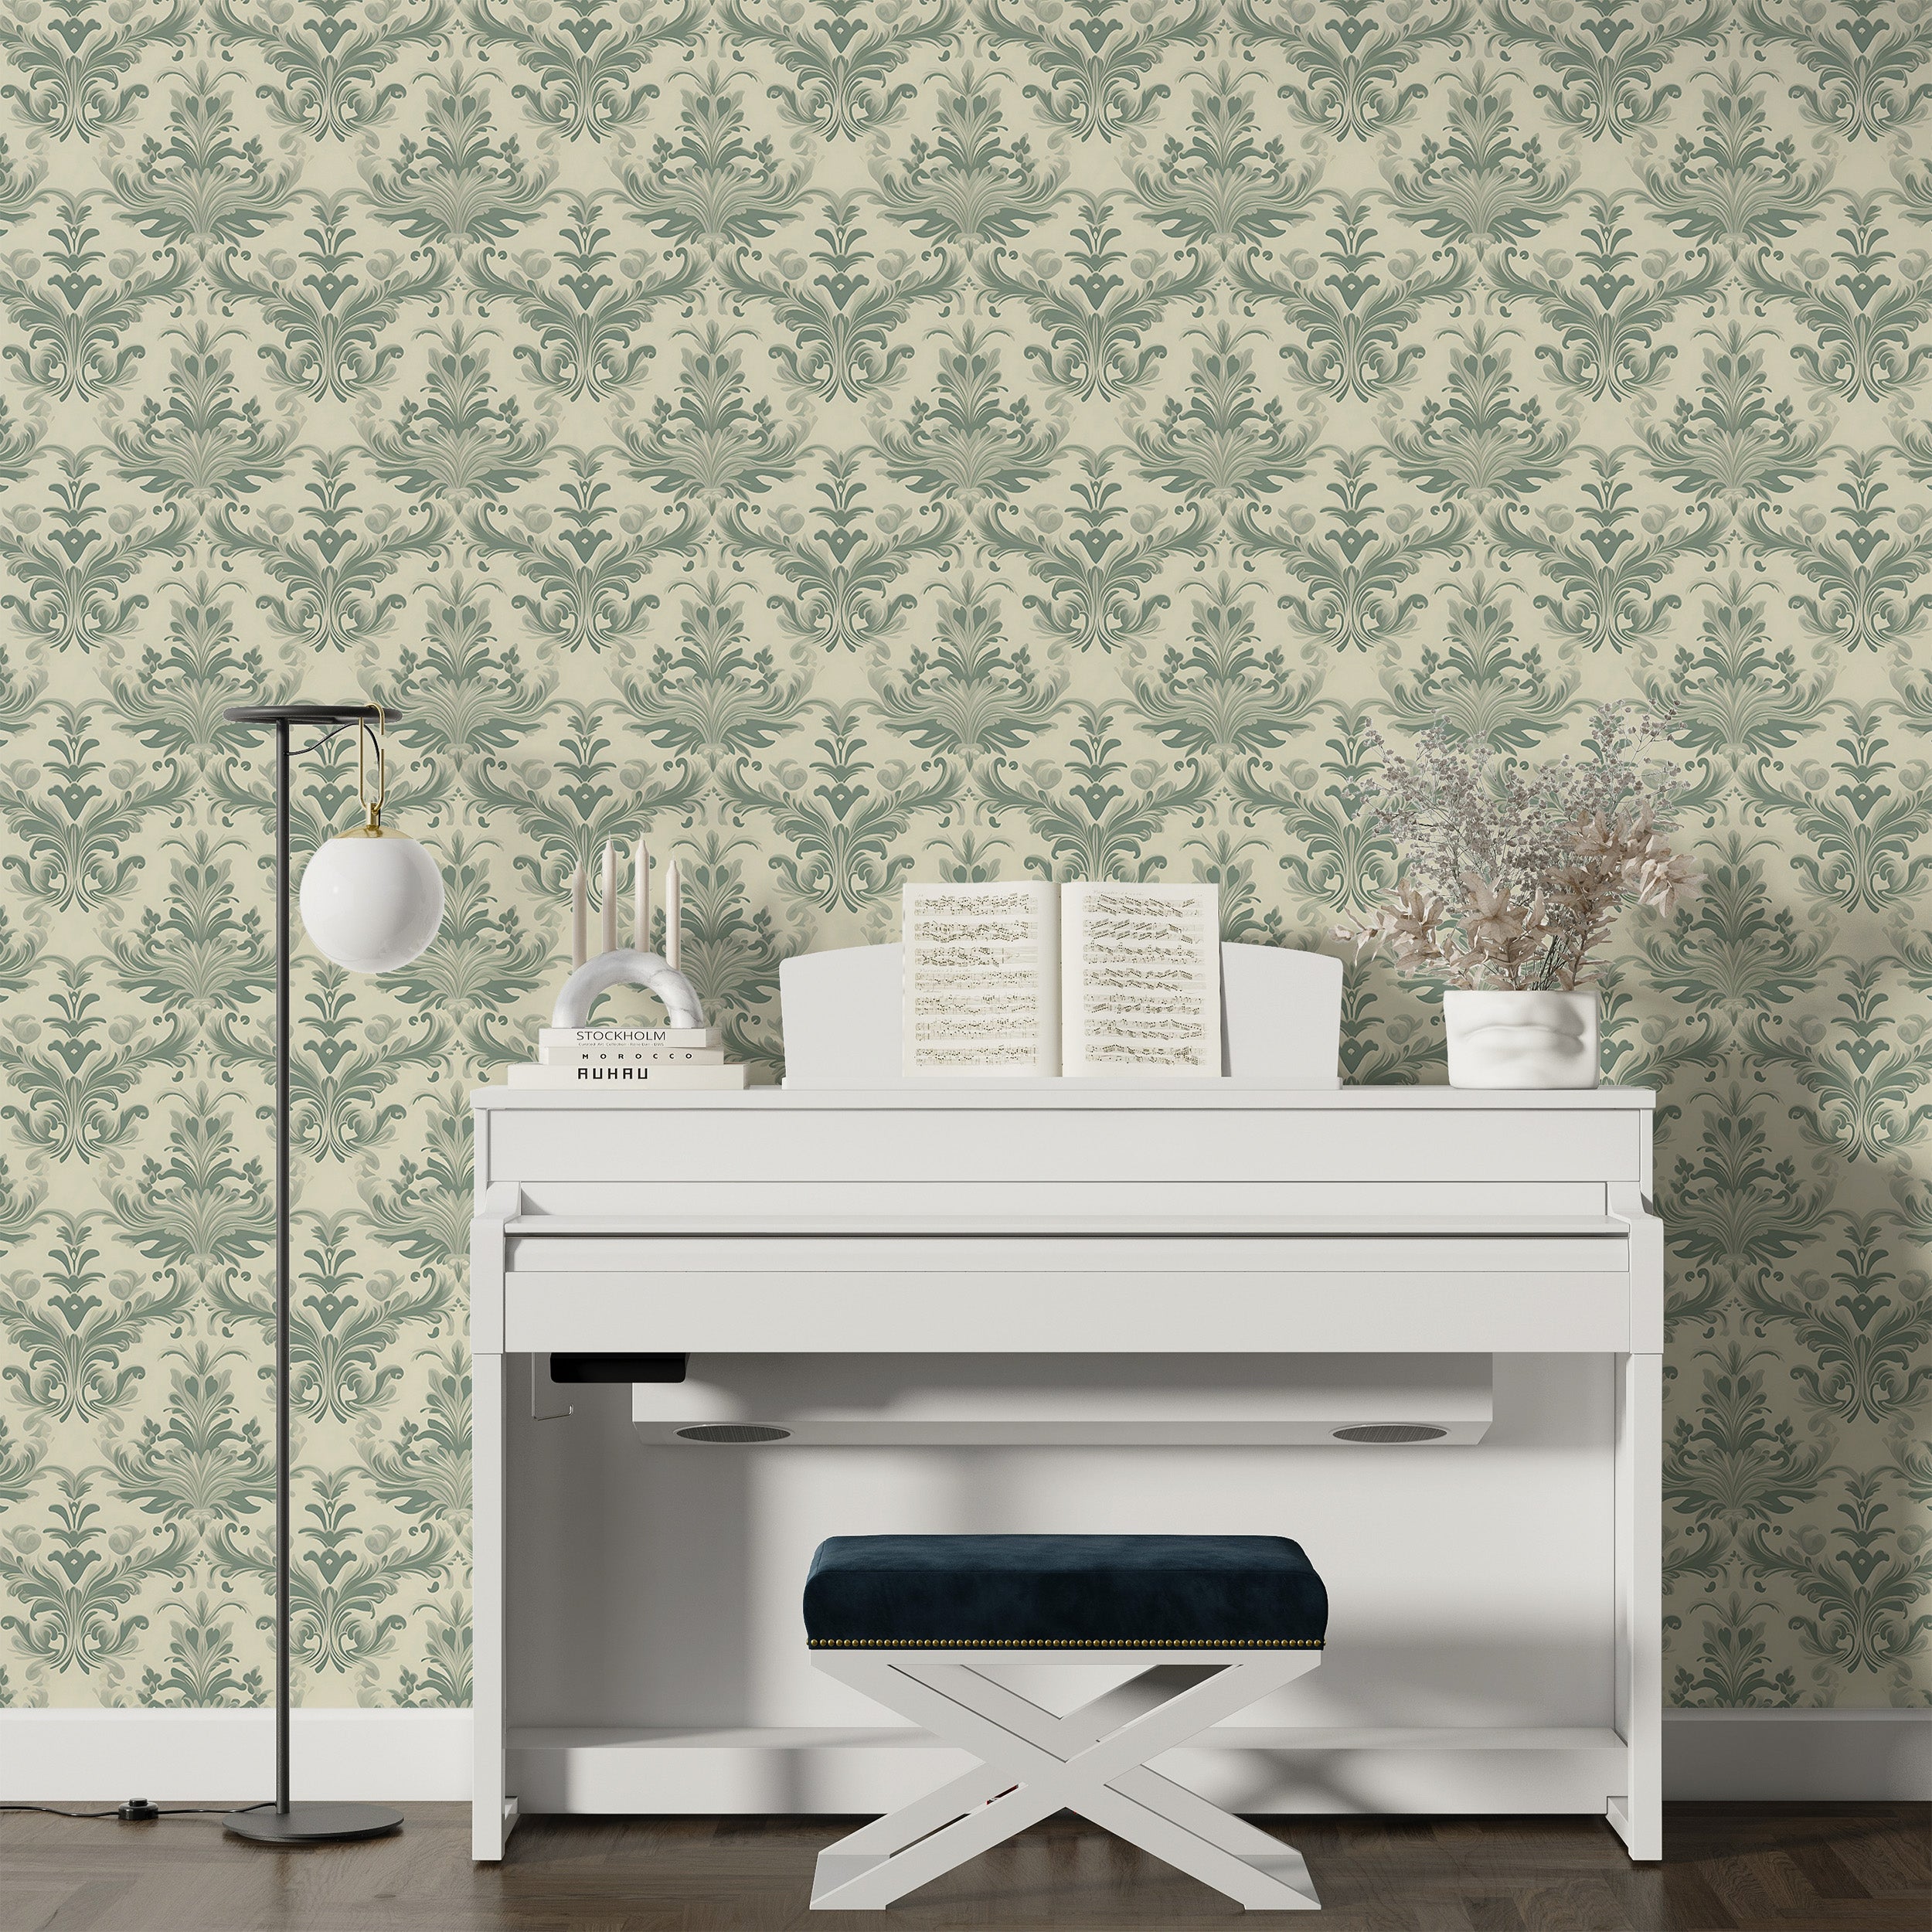 Vintage Peel and Stick Green Wallpaper in Room